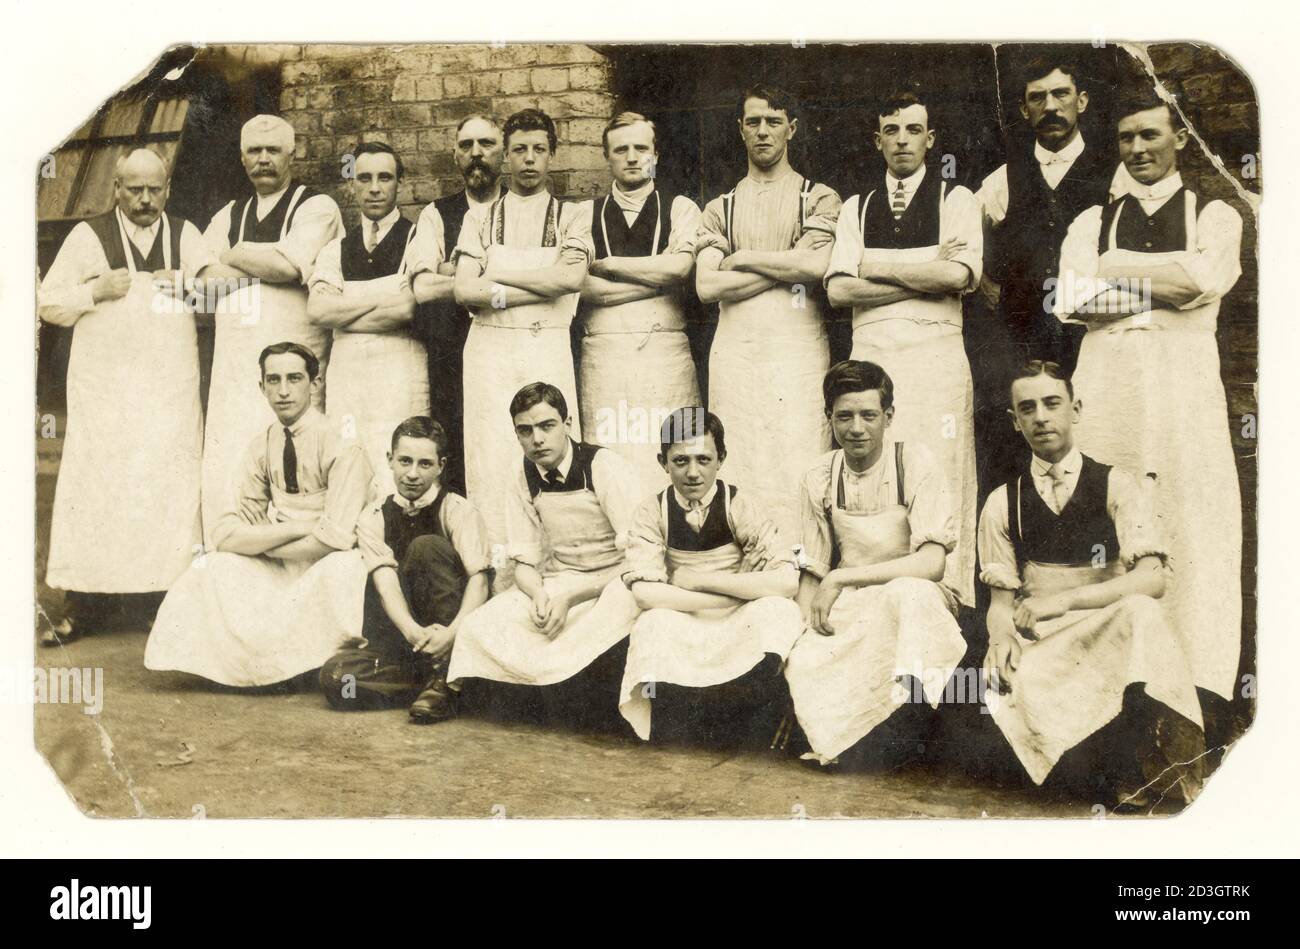 Original early 1900's  pre WW1 era postcard of butchers or bakers, lots of young apprentices, studio of G. Triggle Photographer, Heanor, Derbyshire, England, U.K., circa 1913 Stock Photo